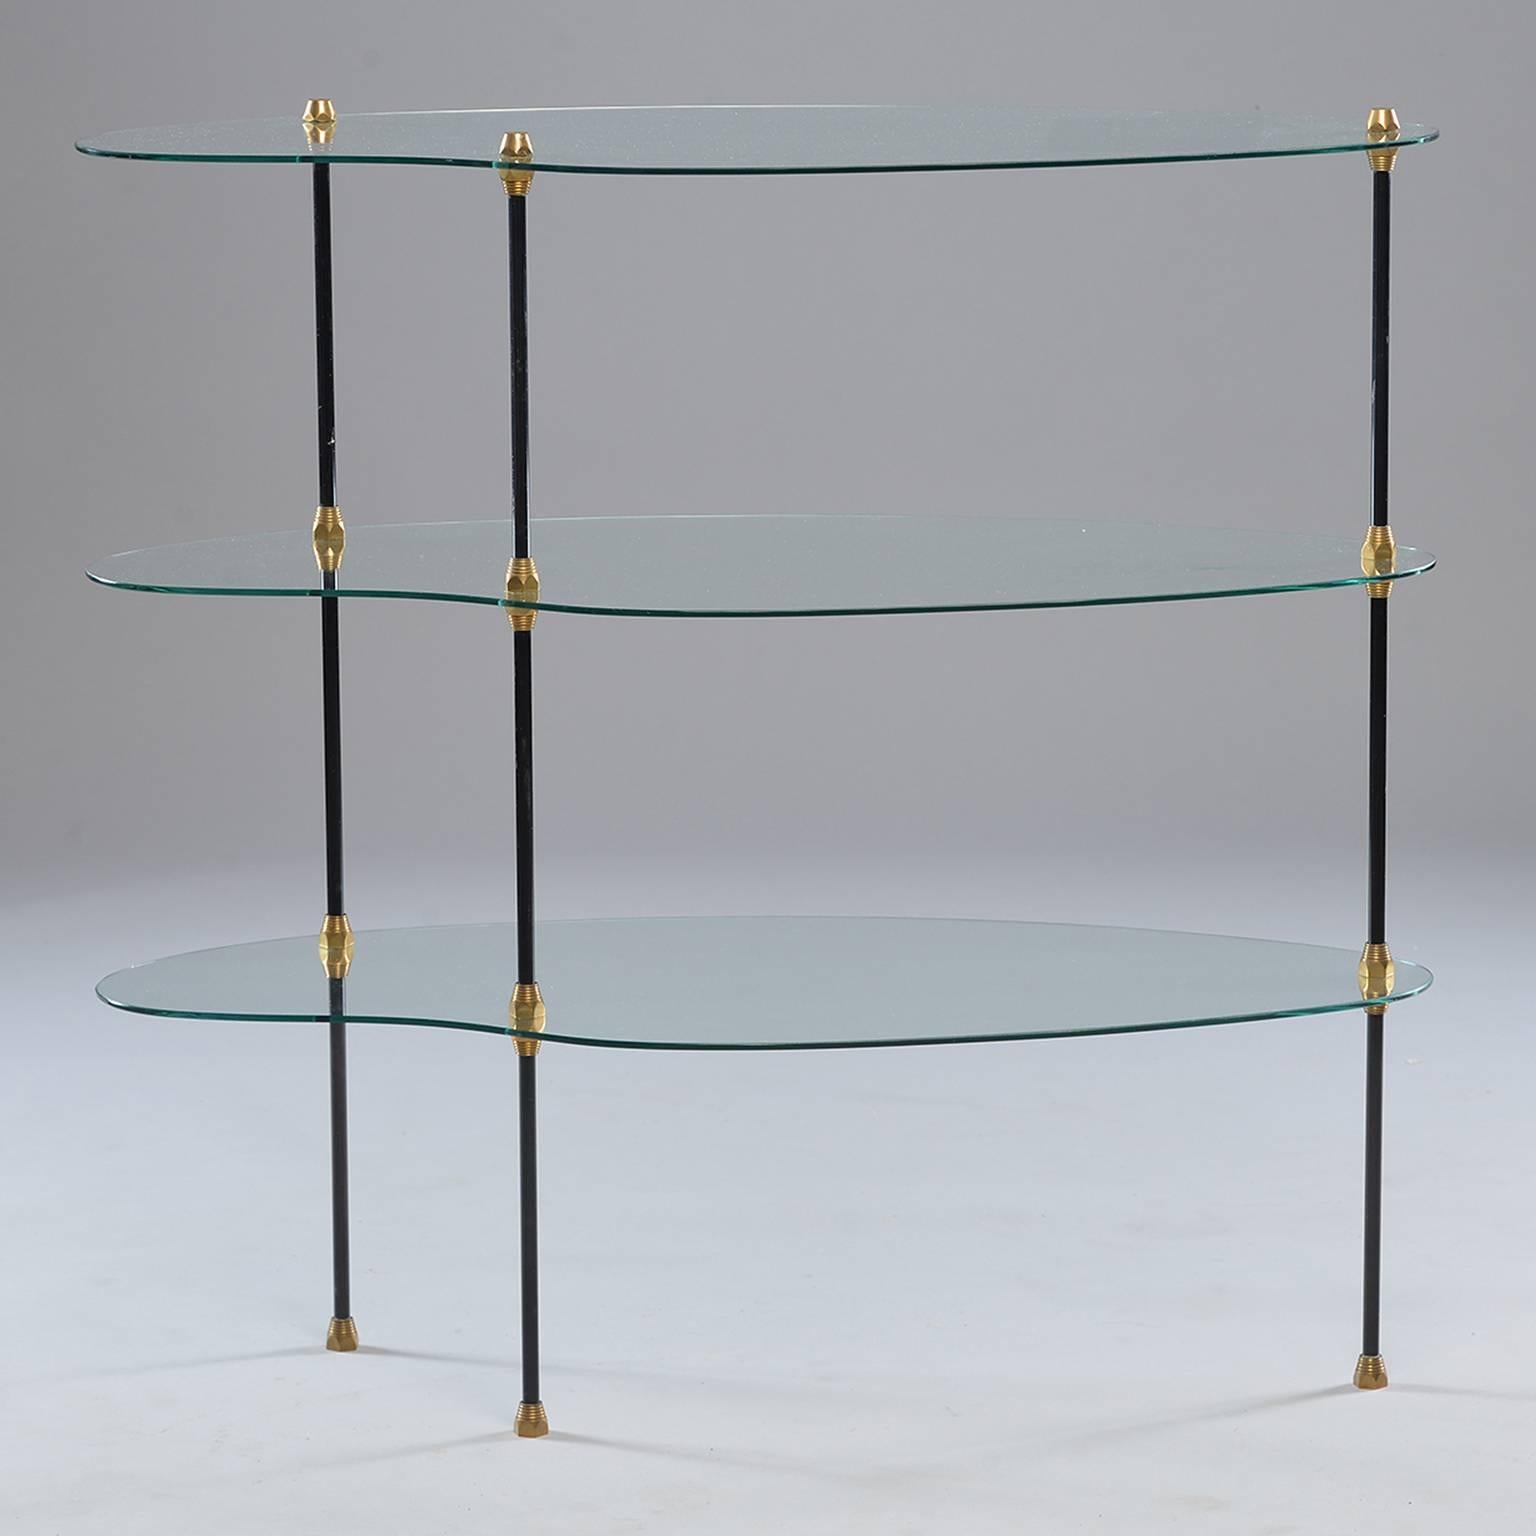 Circa 1960 three tier Italian glass etagere.  Shelves of clear glass have a kidney shape and are joined by three black enameled metal legs with brass trim and feet.  Excellent vintage condition with scattered minor surface wear to glass and enameled